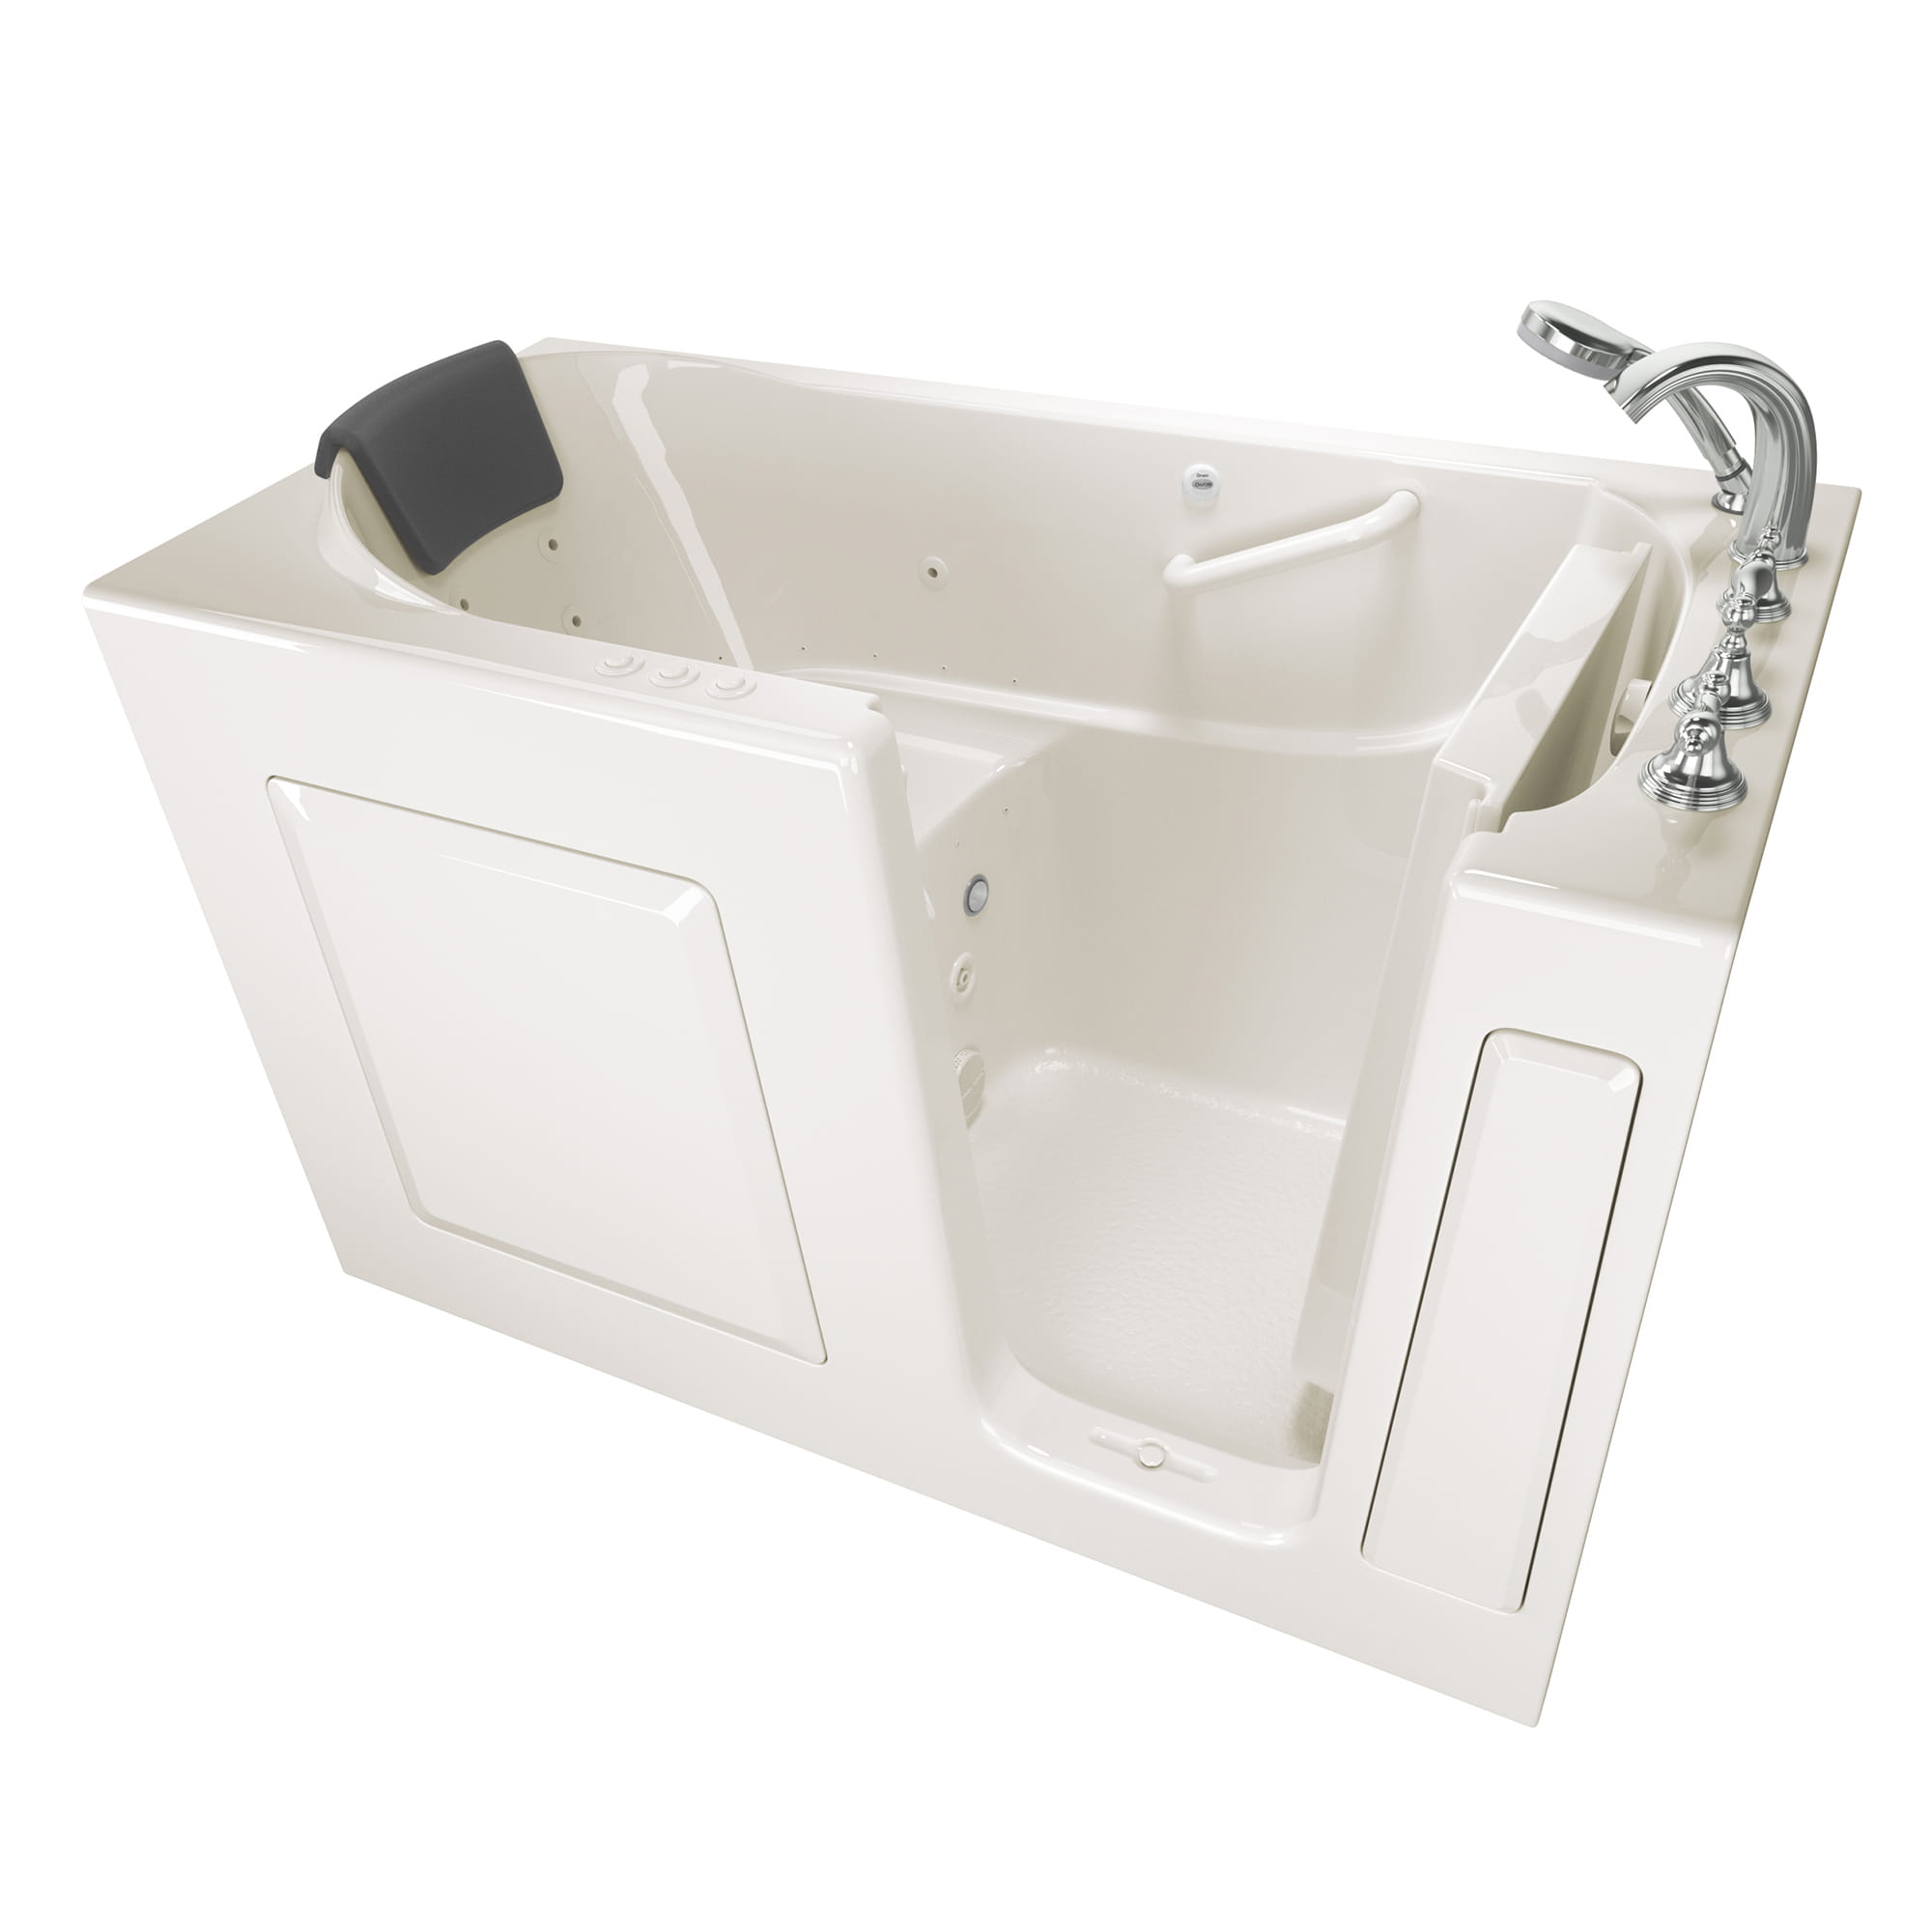 Gelcoat Premium Series 30 x 60 -Inch Walk-in Tub With Combination Air Spa and Whirlpool Systems - Right-Hand Drain With Faucet